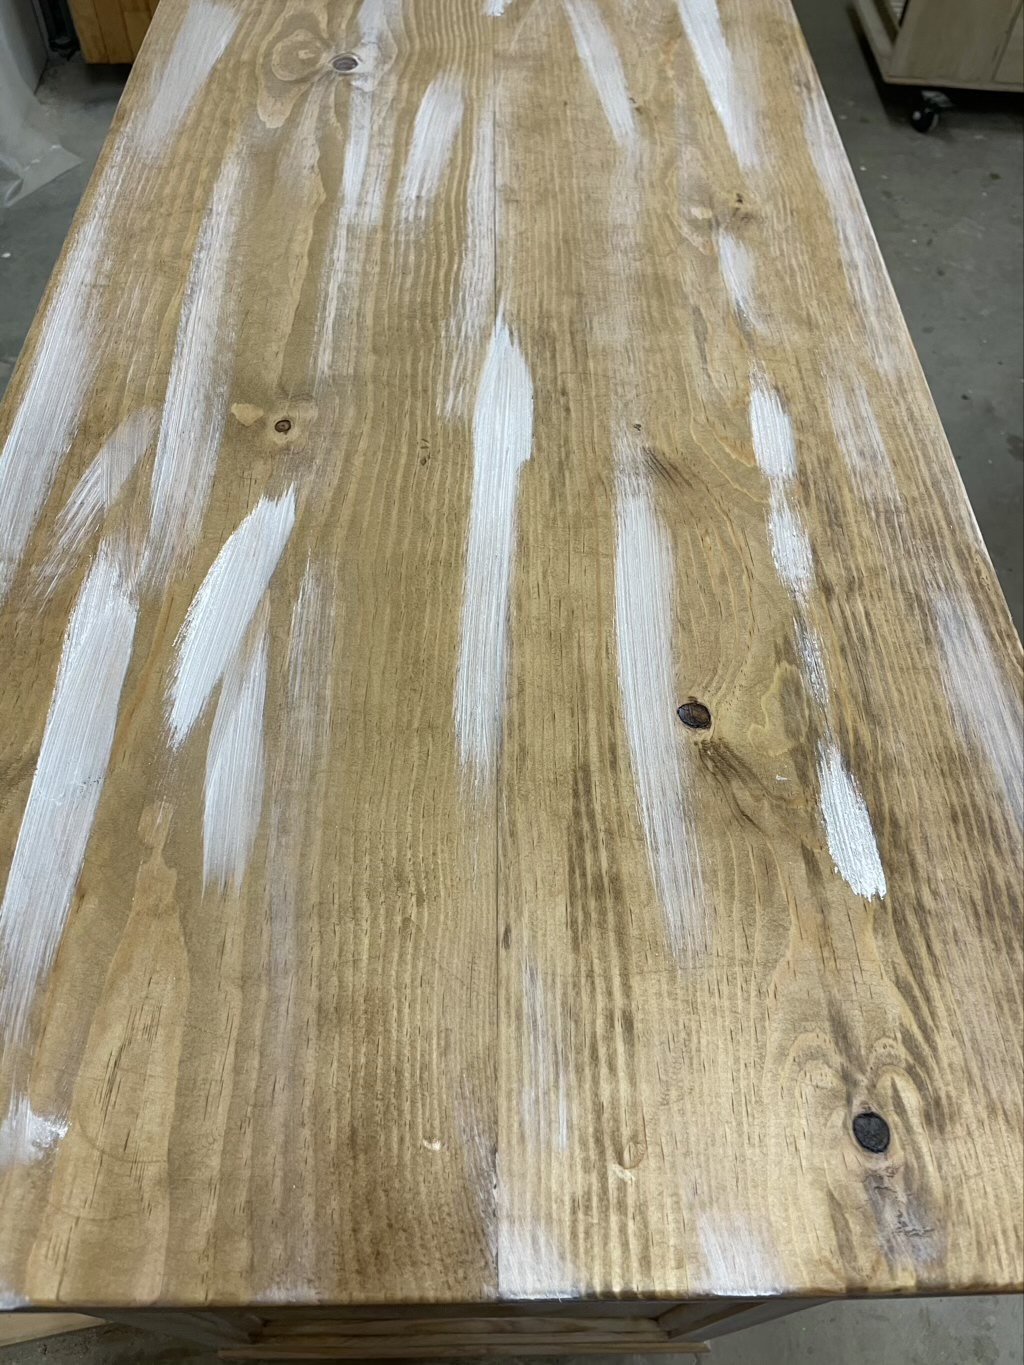 Dots and streaks of liming wax